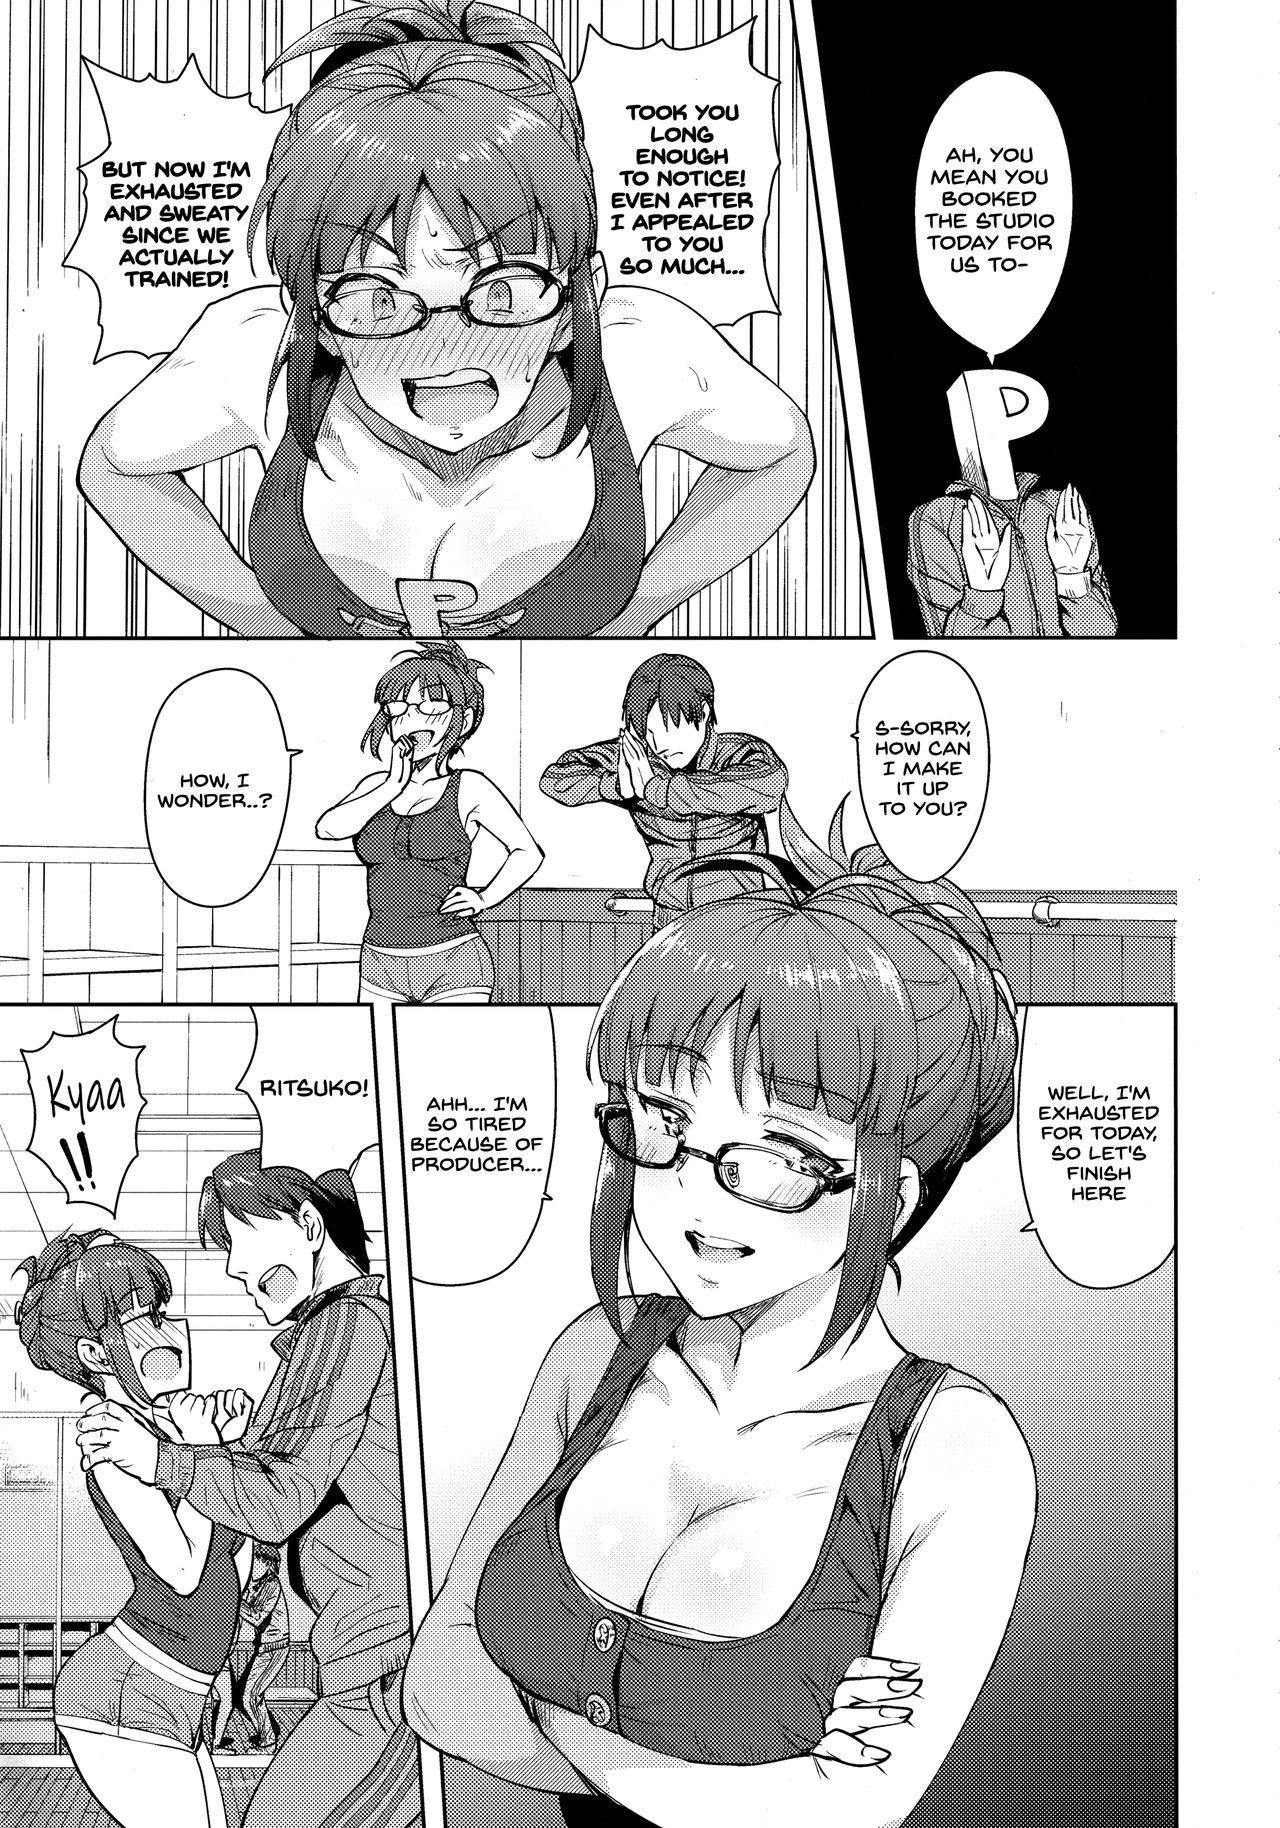 Pack Ritsuko to Stretch! - The idolmaster Jerk - Page 4